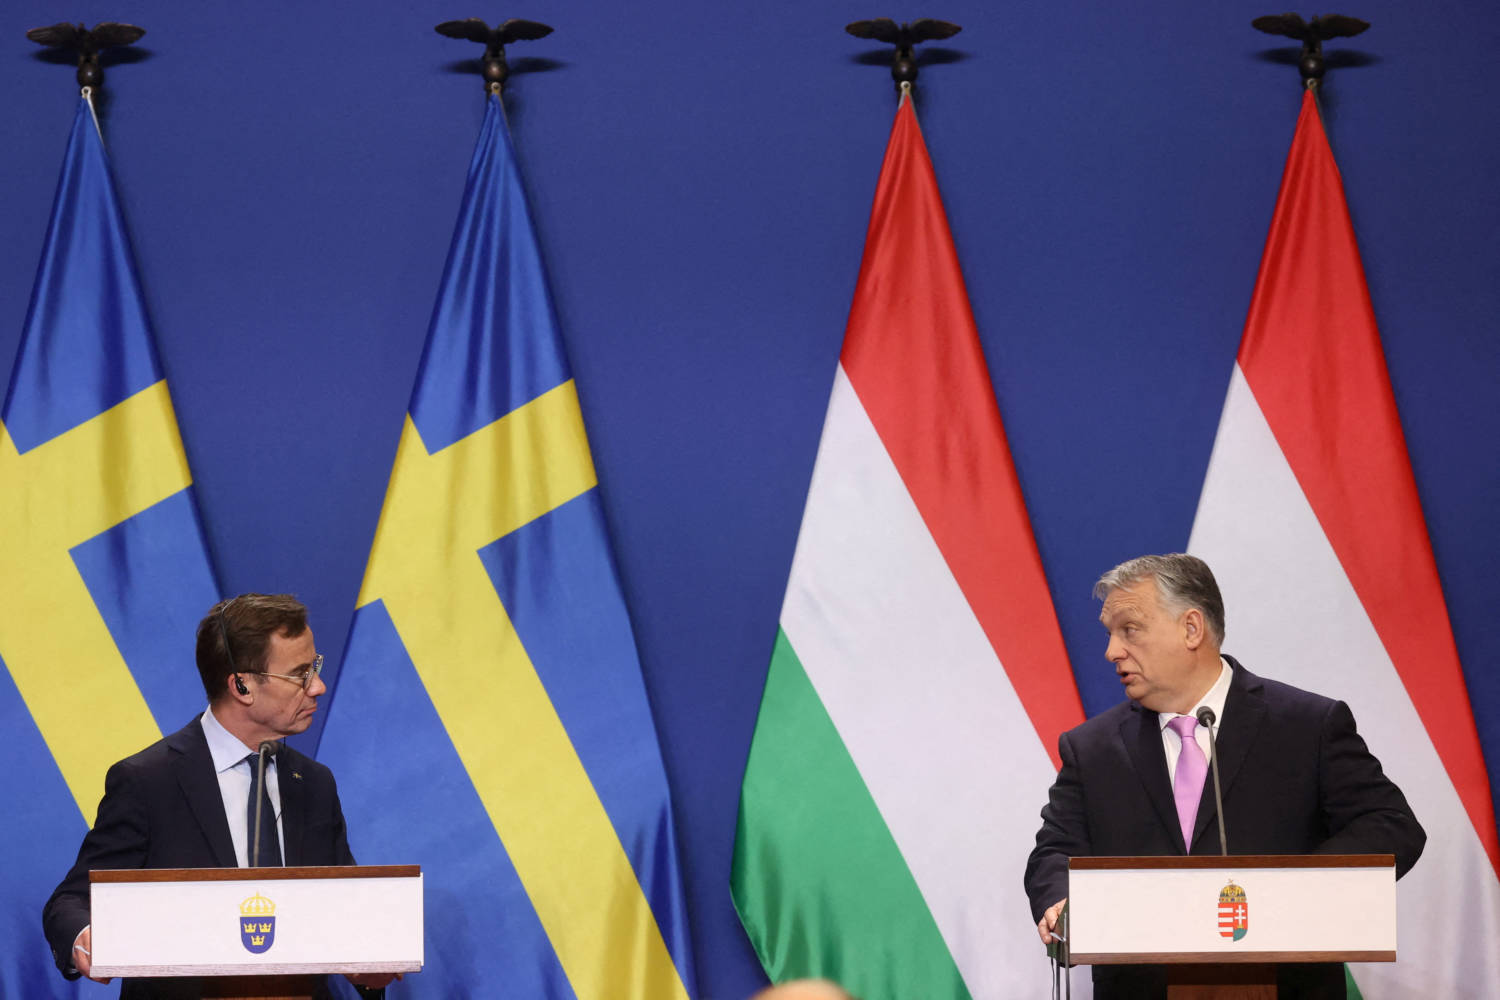 Swedish Pm Kristersson And Hungarian Pm Orban Hold A Joint Press Conference In Budapest